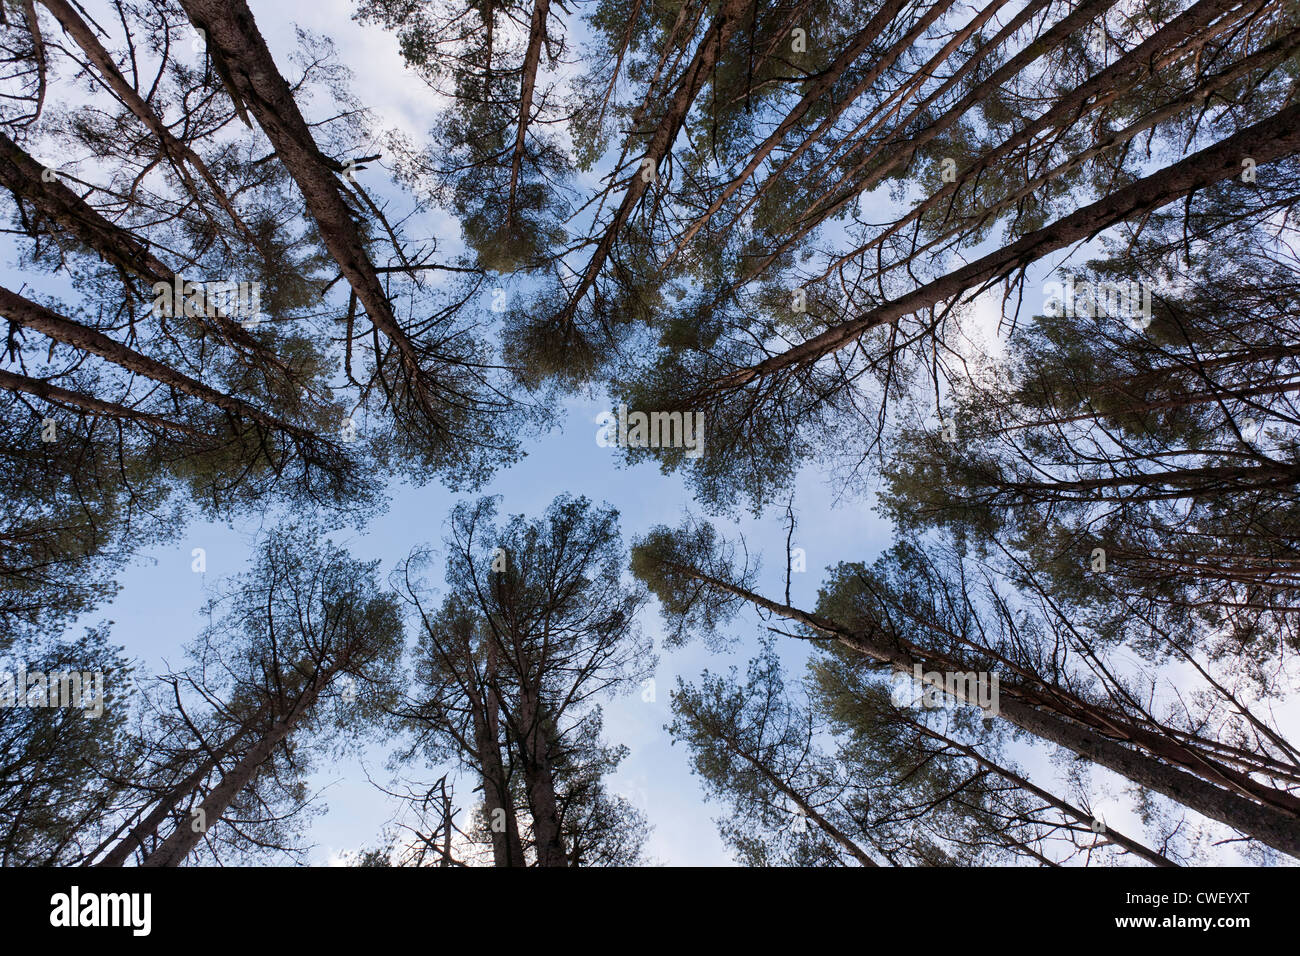 Looking Up Through Tall Pine Trees Stock Photo